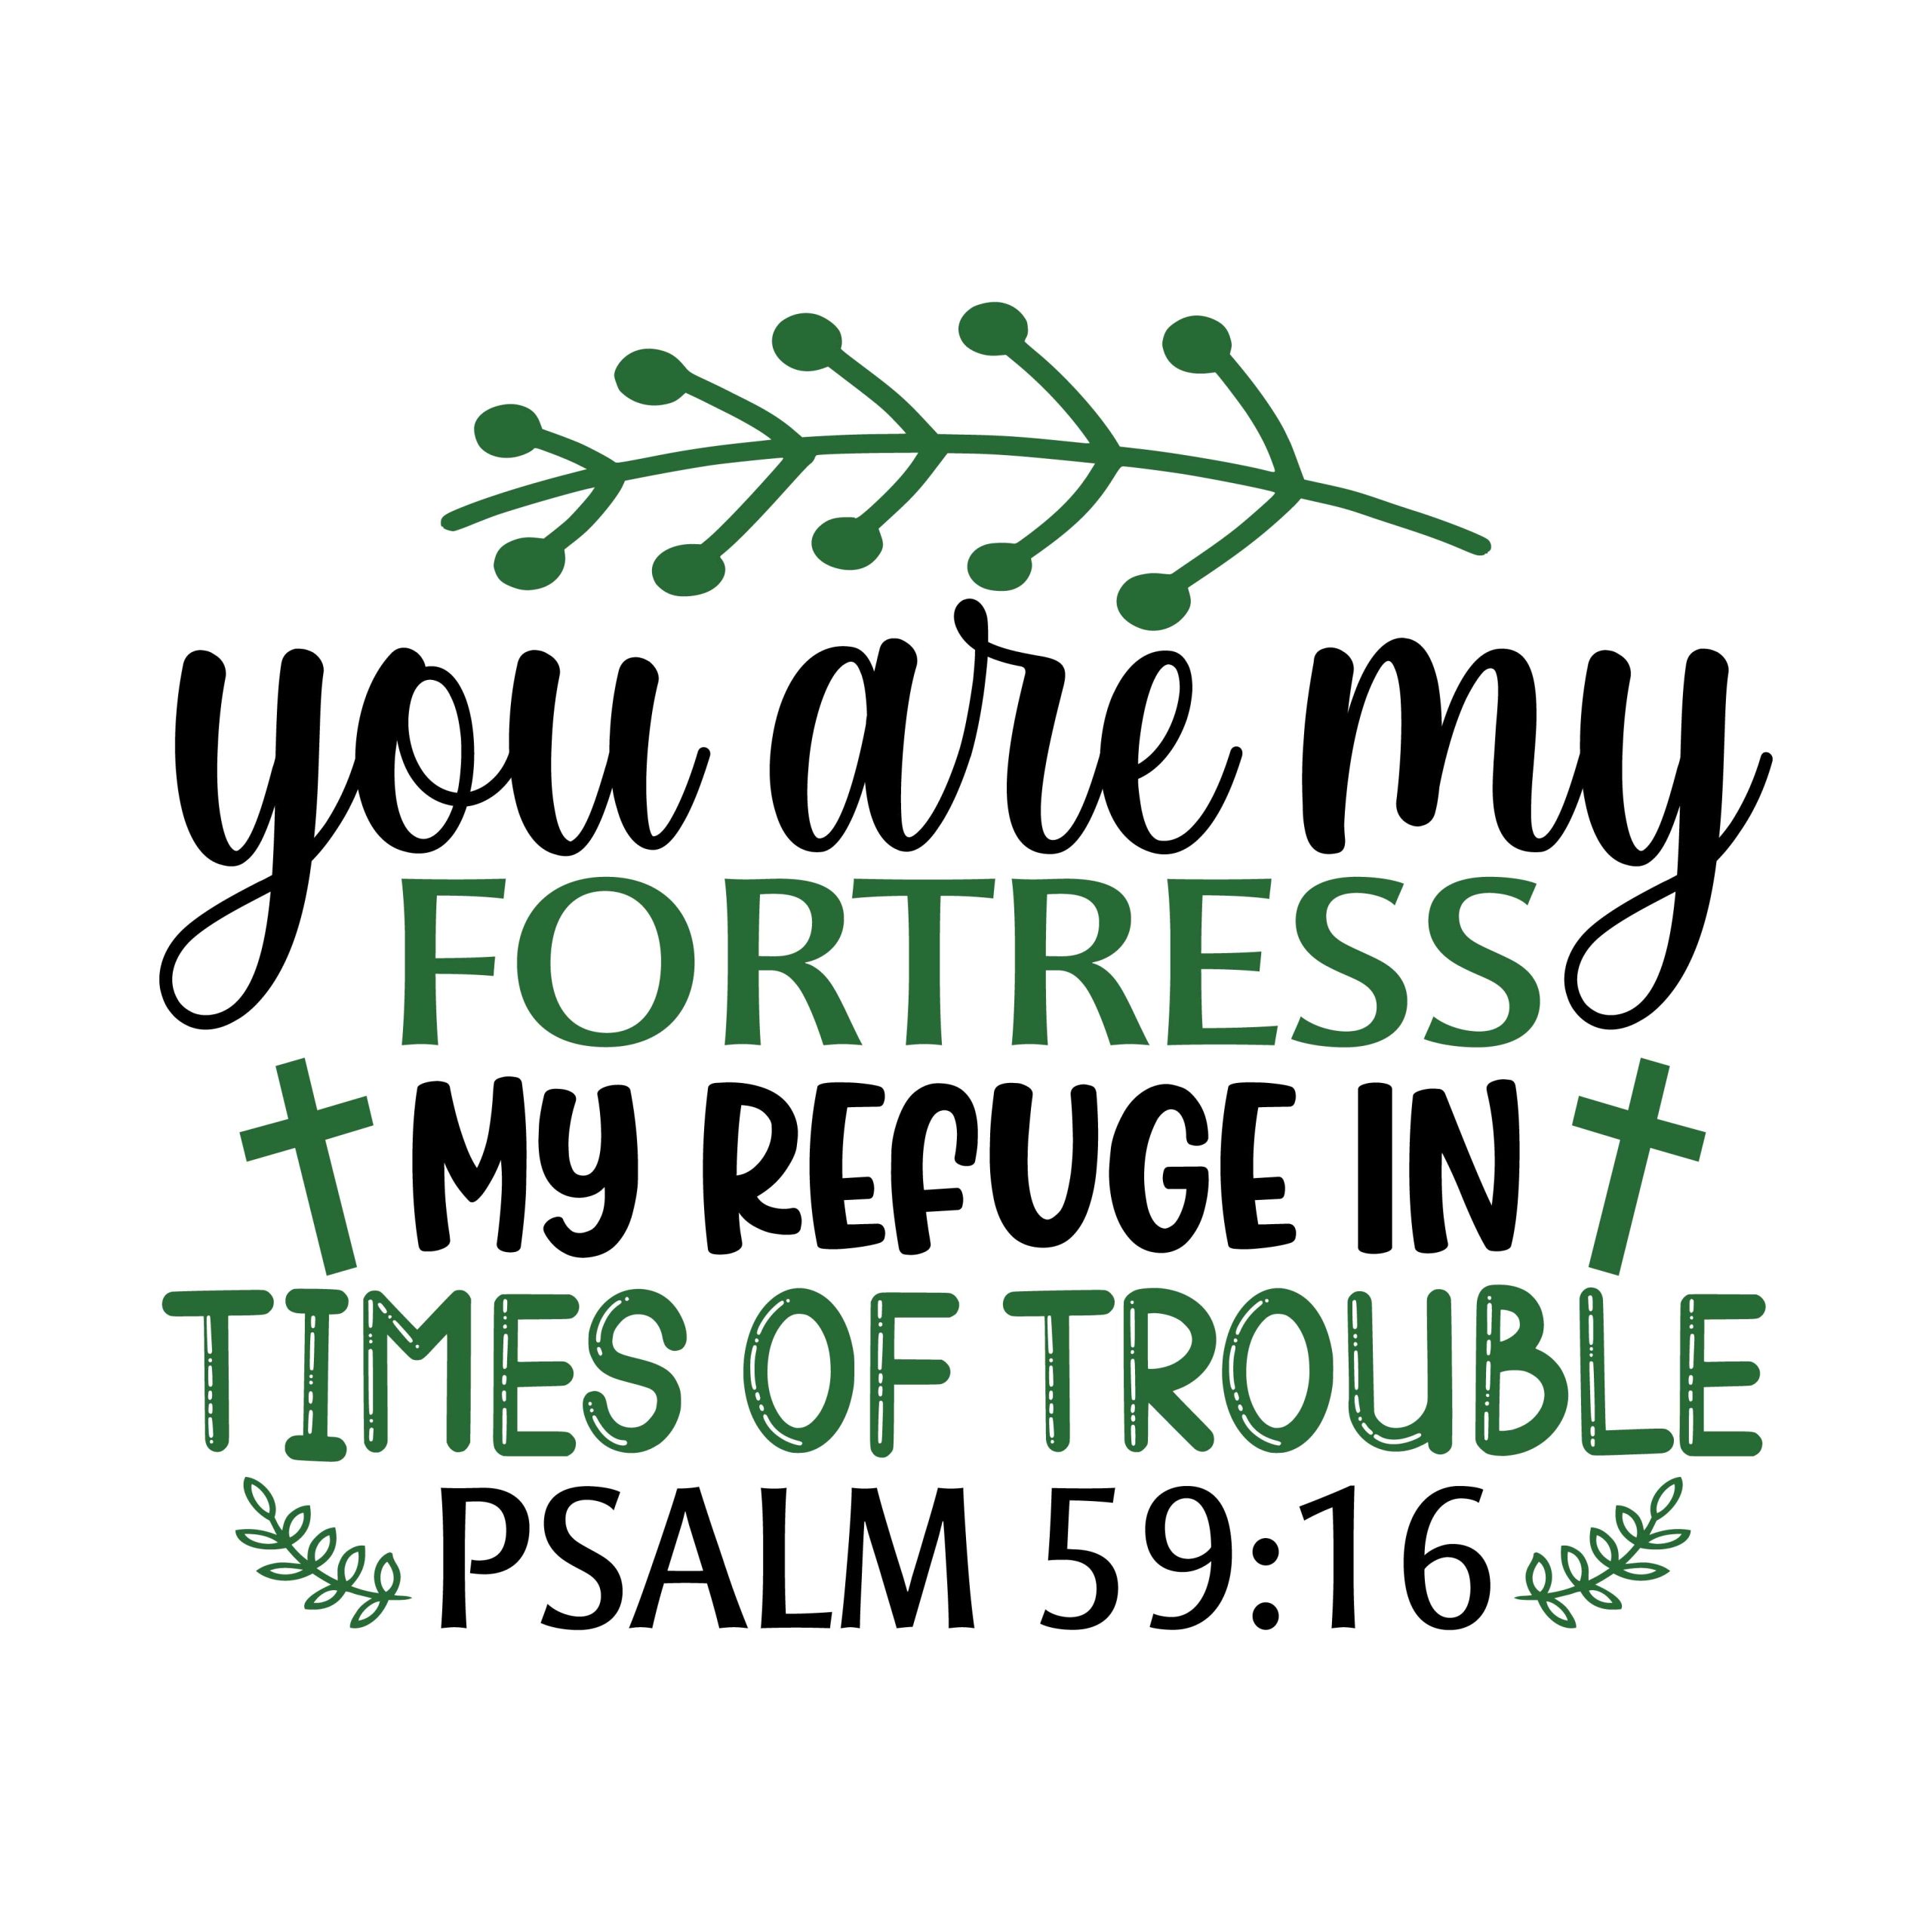 You are my fortress my refuge in times of trouble psalm 59:16, bible verses, scripture verses, svg files, passages, sayings, cricut designs, silhouette, embroidery, bundle, free cut files, design space, vector